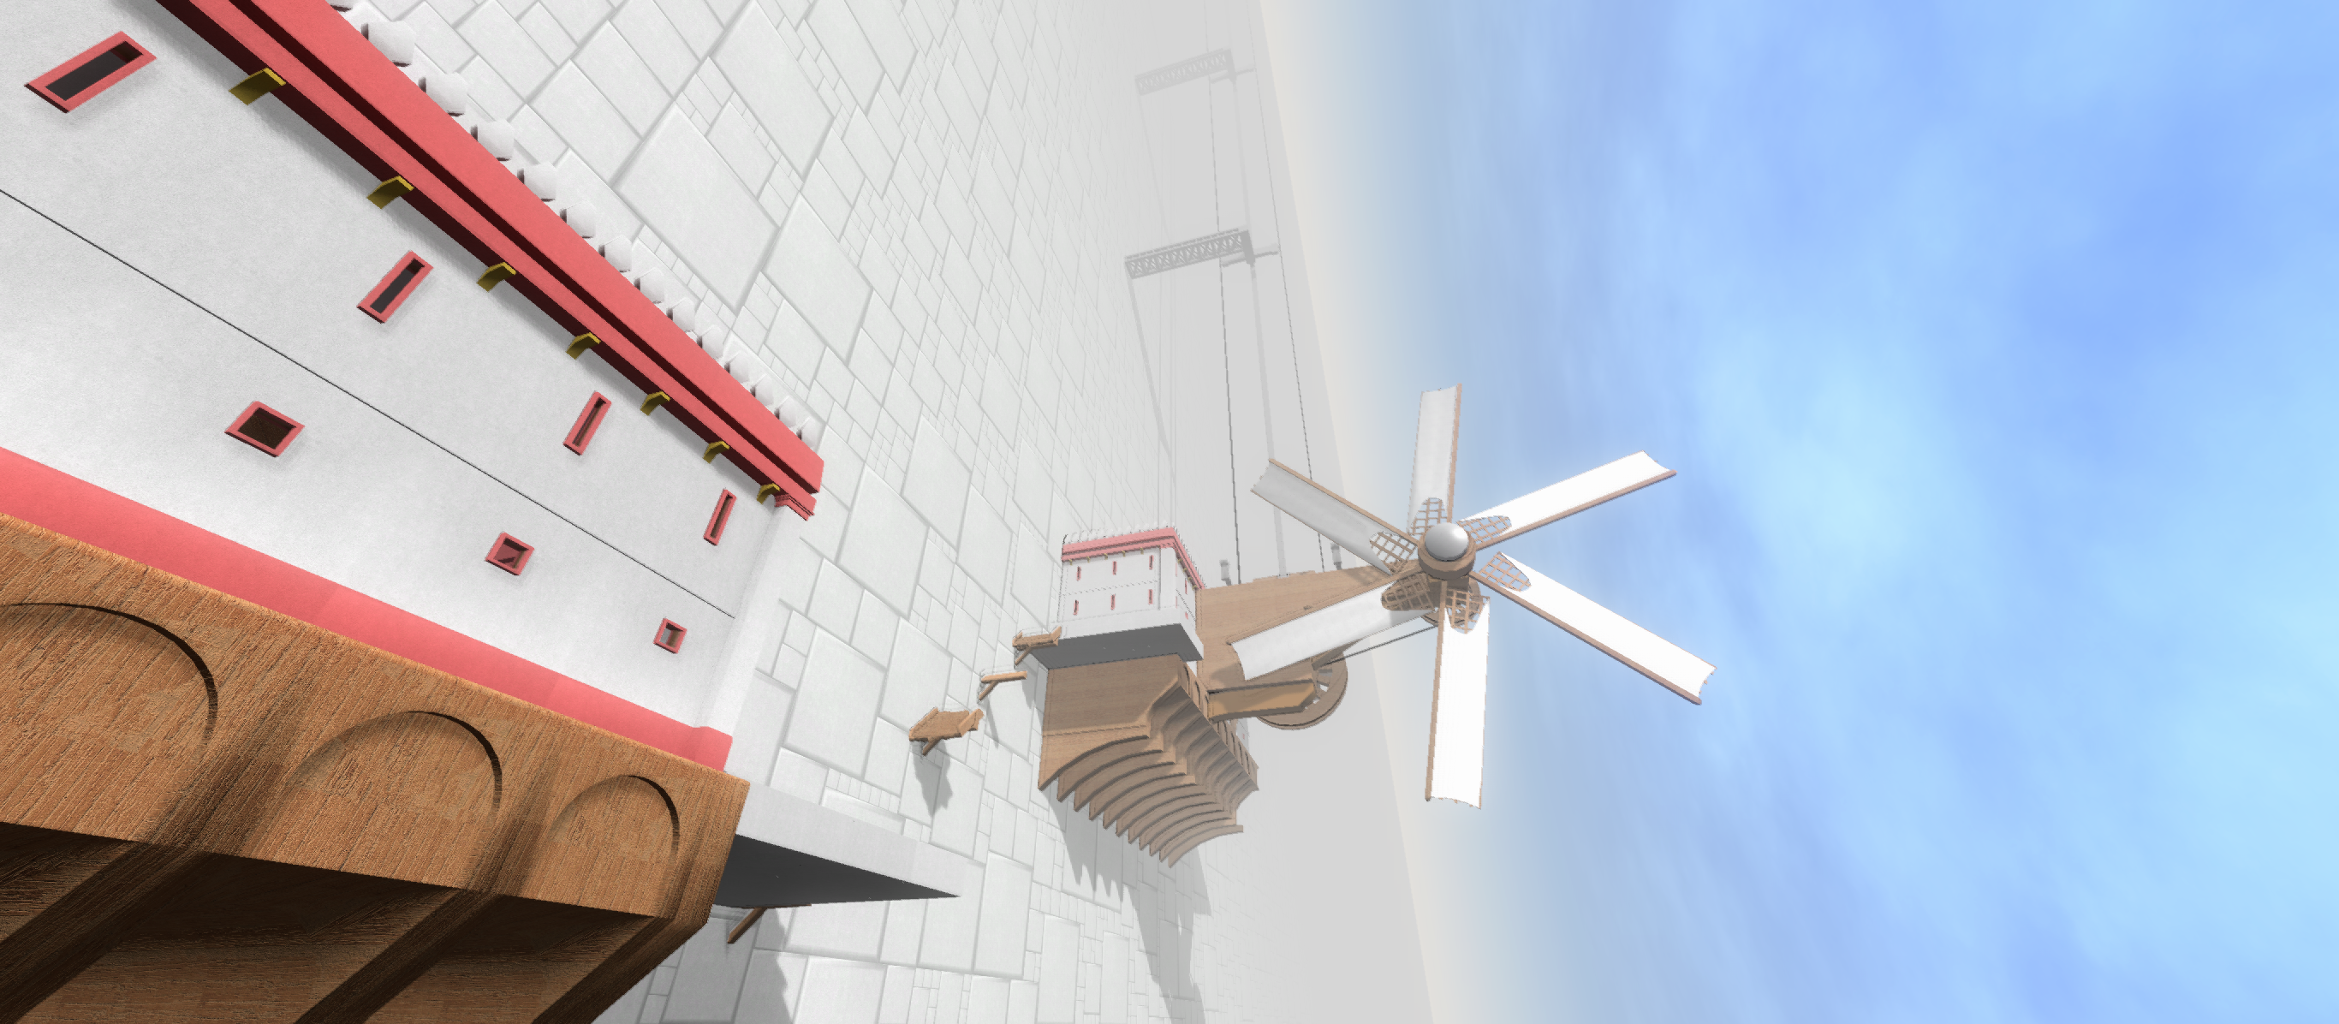 Against-the-Wall-Windmill-Aug-2013